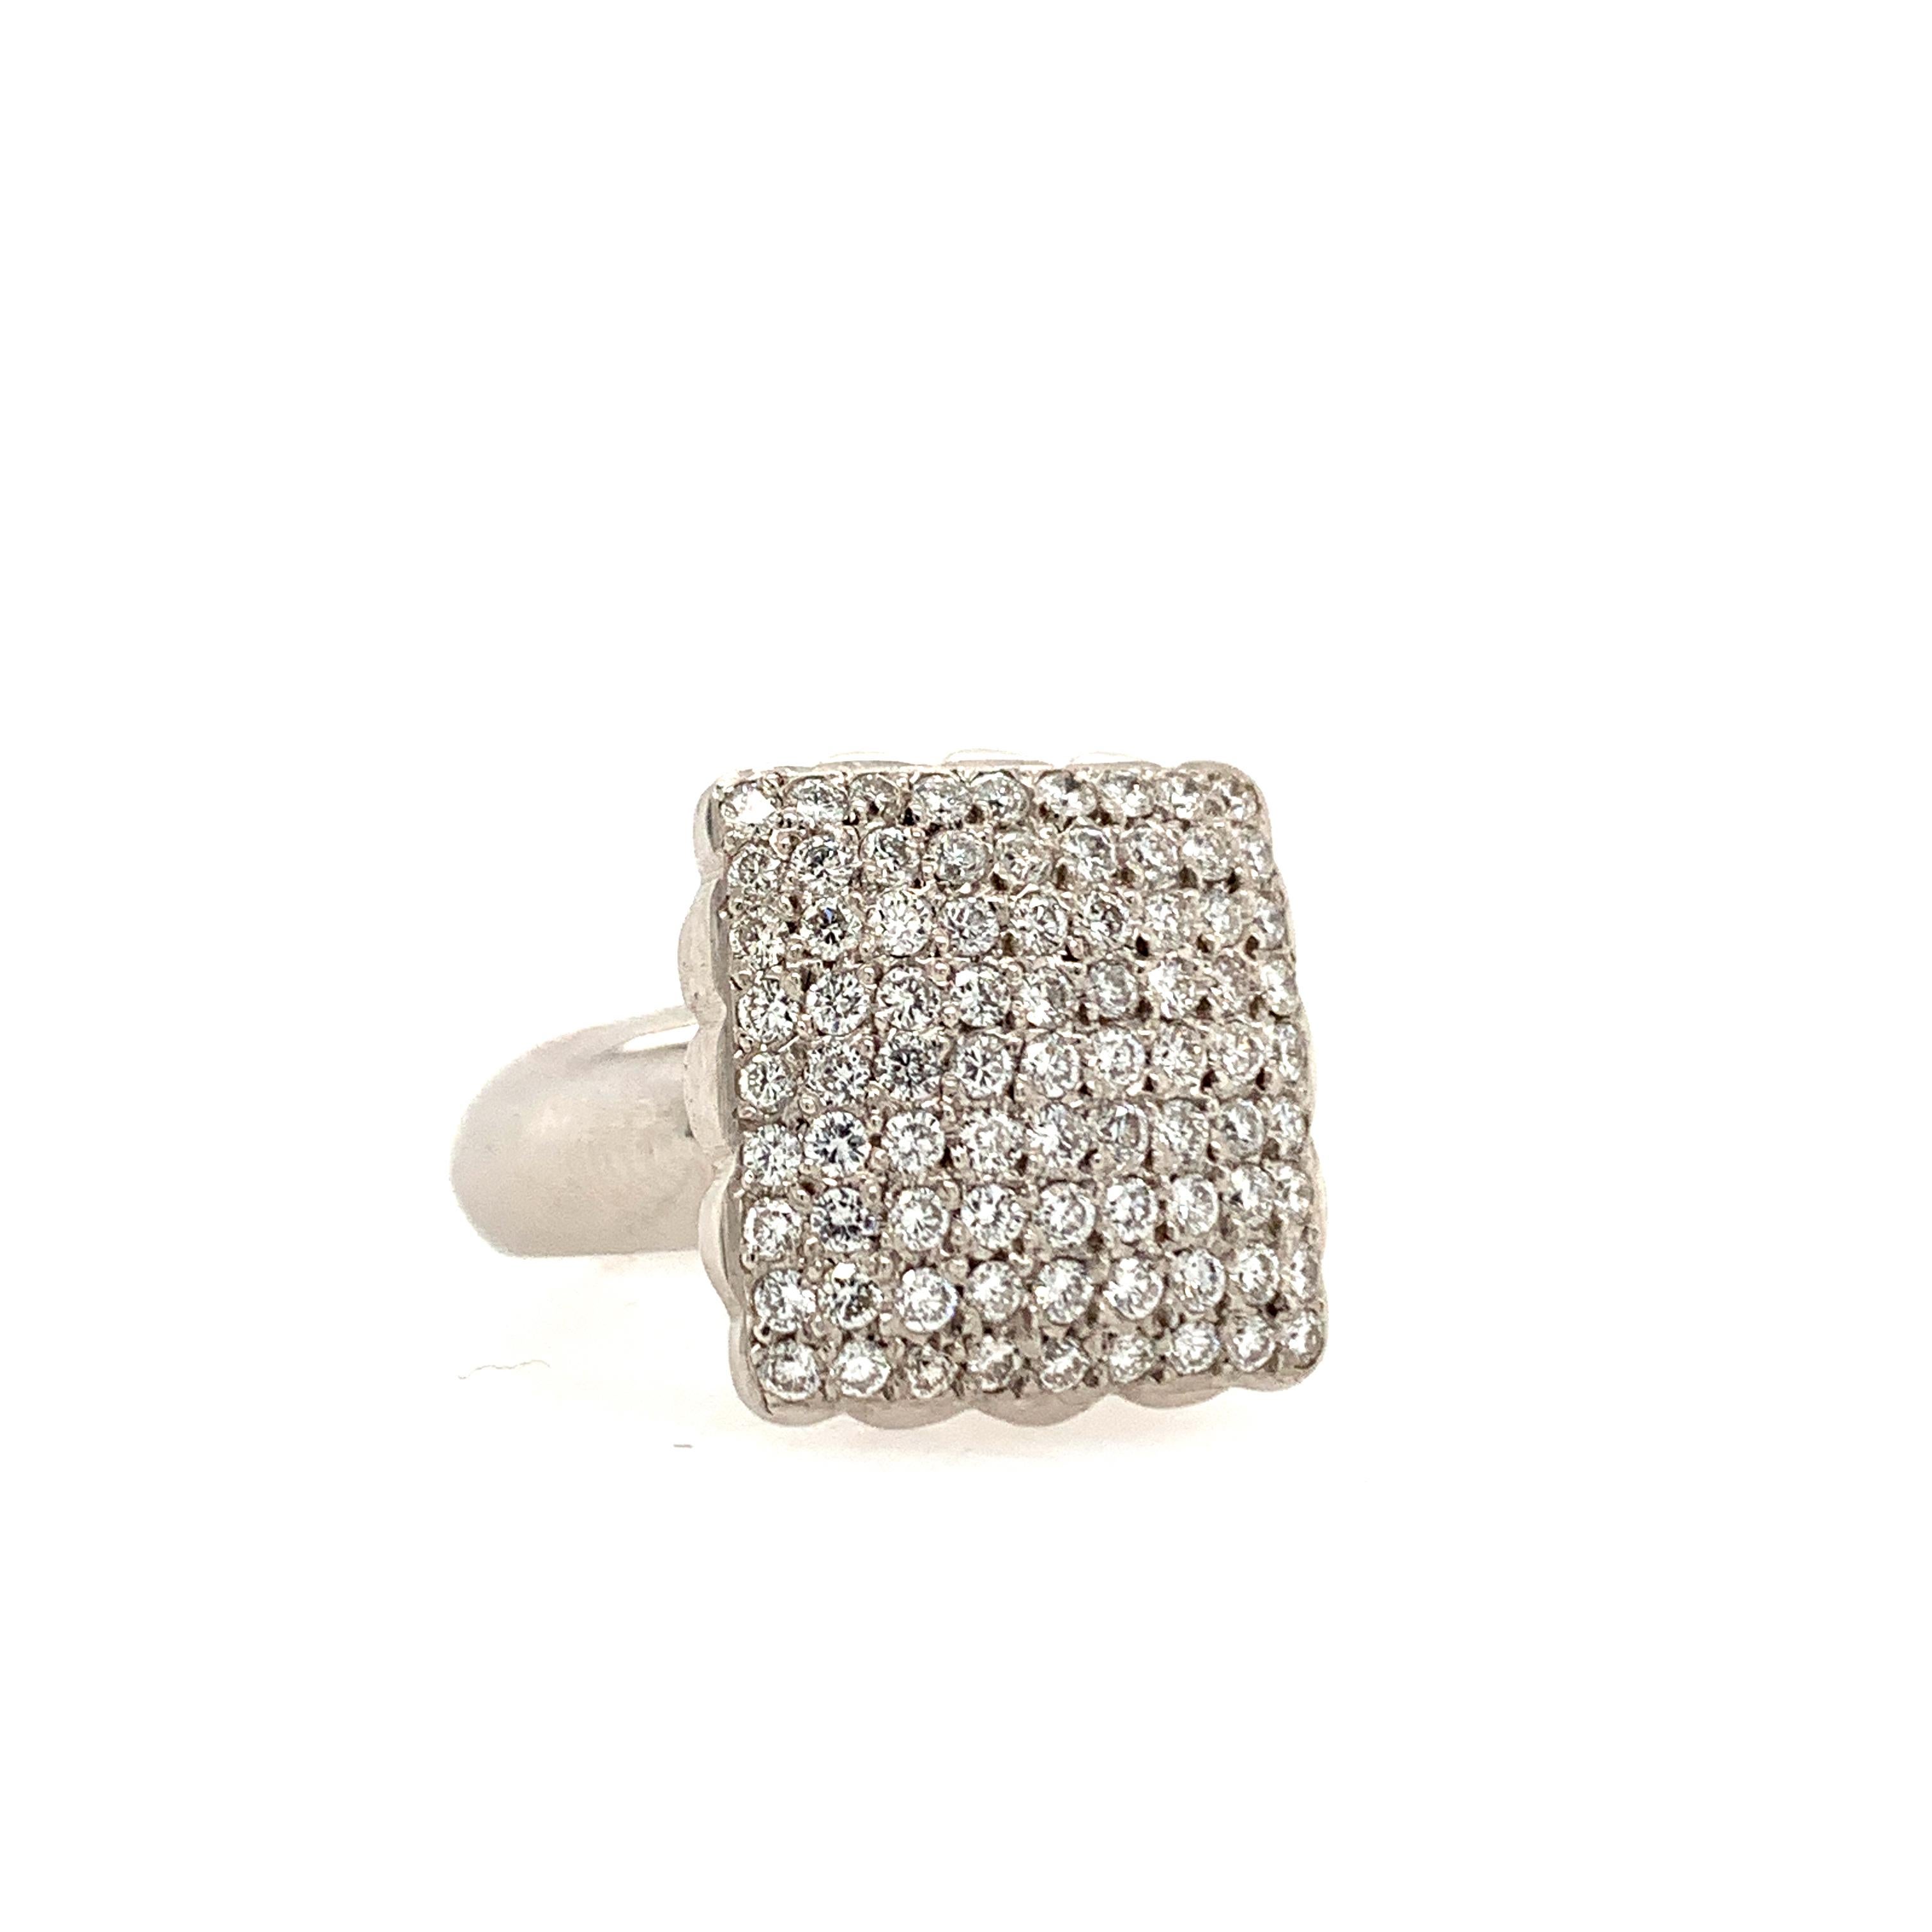 This beautiful ring is handmade and flaunts round brilliant diamonds pave-set for a total carat weight of 1.20 carat. 

Set in 18K white gold.

1.20 total carat weight.

Size 6.5 (can be resized free of charge).